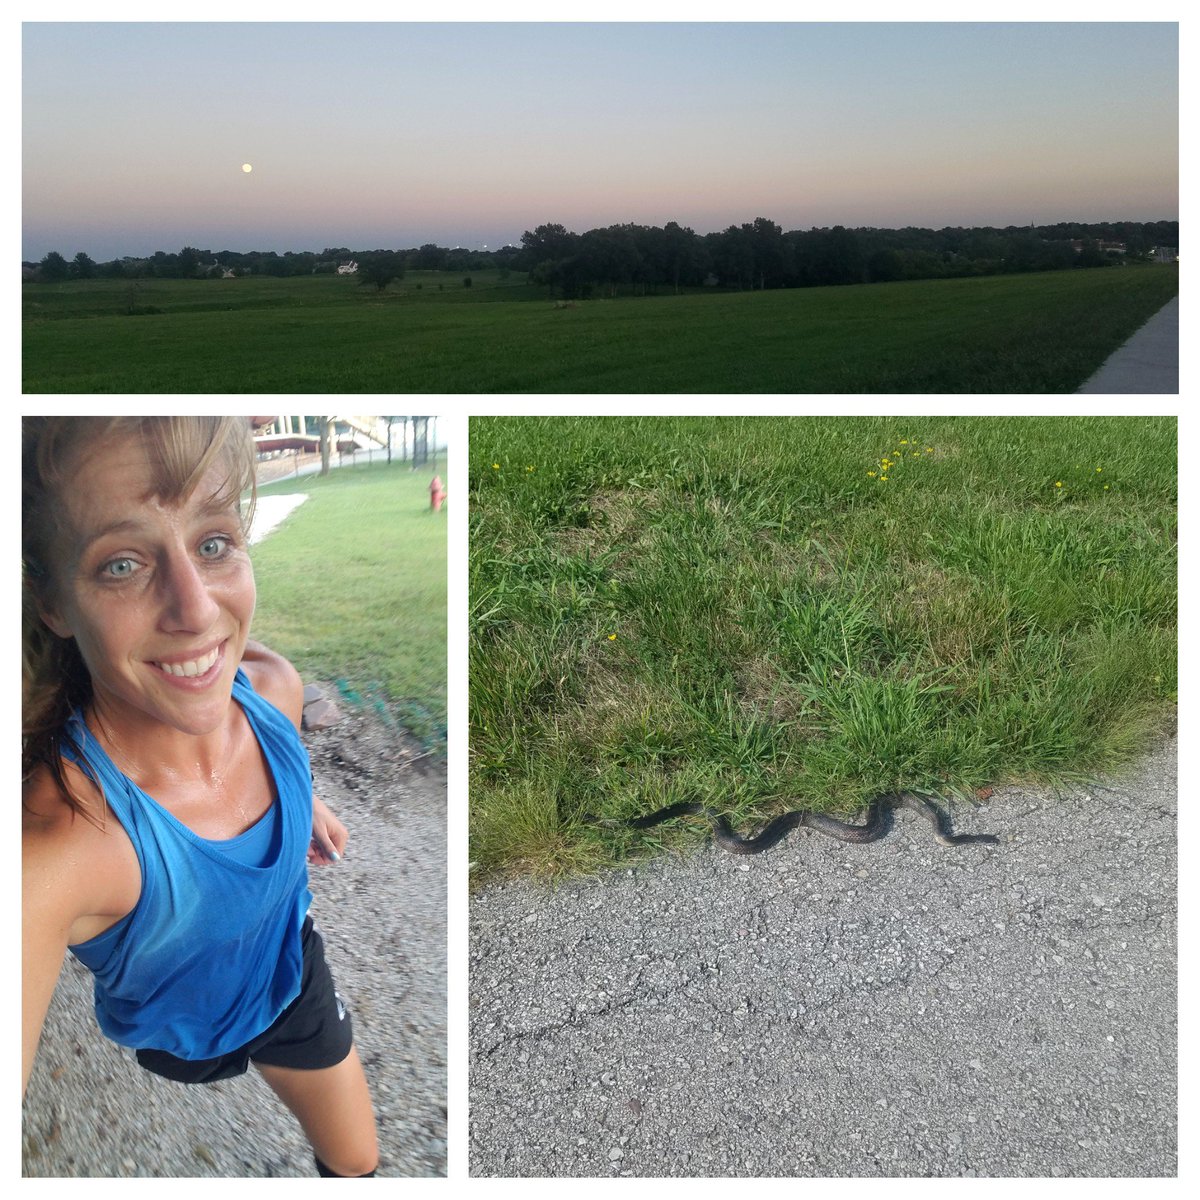 👟- 8mi easy & hot Mon  (🐍😳)
👟- 10.2mi dark PM #tracktuesday 2up, 8x200, 10min threshold, 4 down
👟- 8mi 4:50am Wed recovery

Is it a double if I run again before the 🌞 comes up? #nightdouble #naflagvisor #sunsetrun #sunriserun #happyhumpday